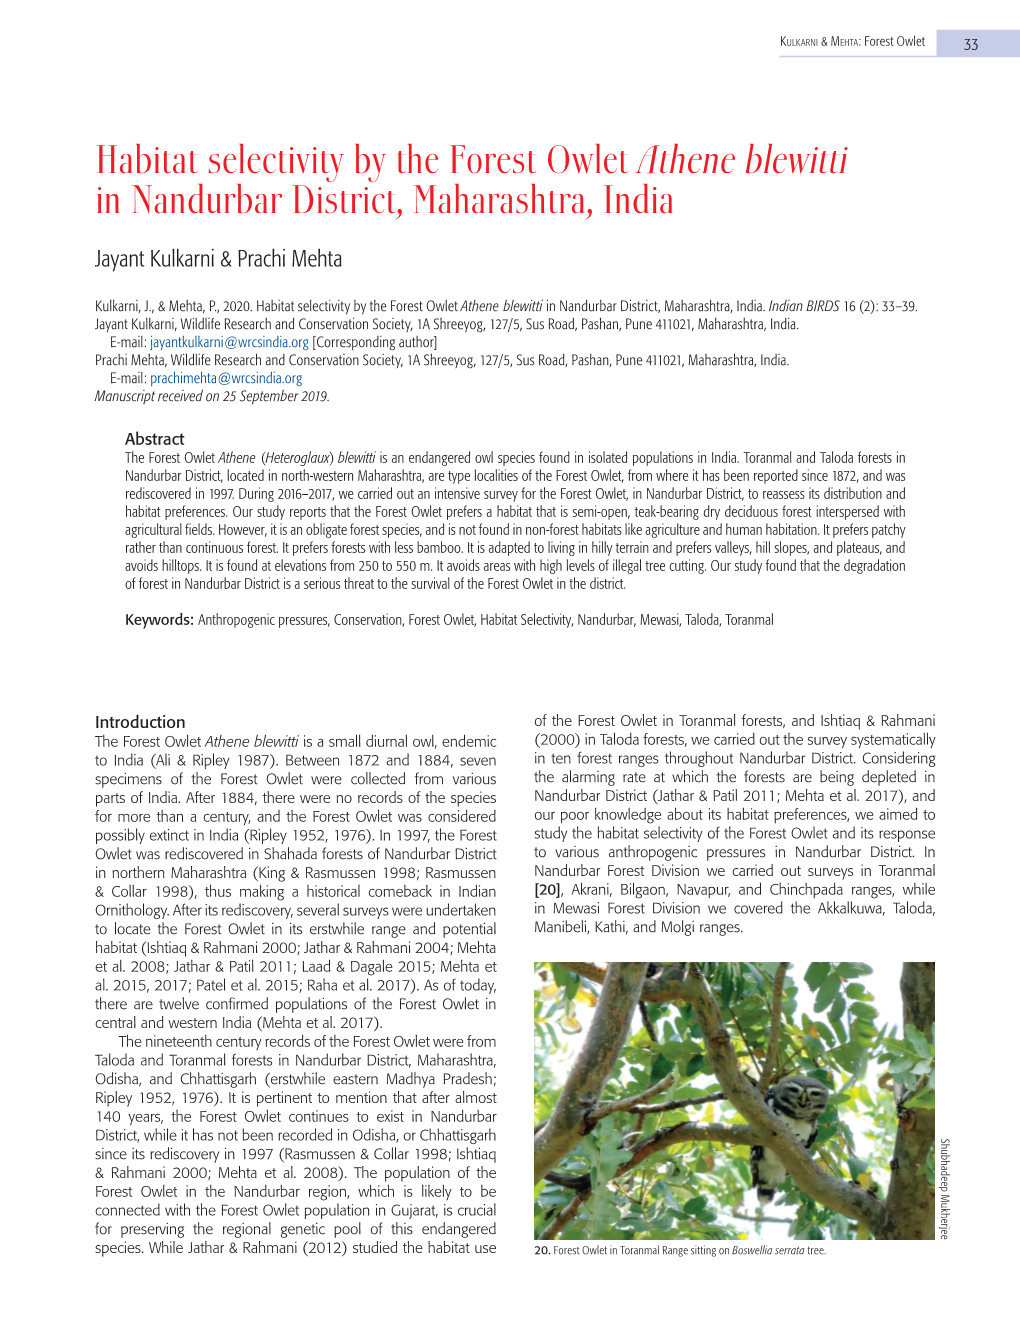 Habitat Selectivity by the Forest Owlet Athene Blewitti in Nandurbar District, Maharashtra, India